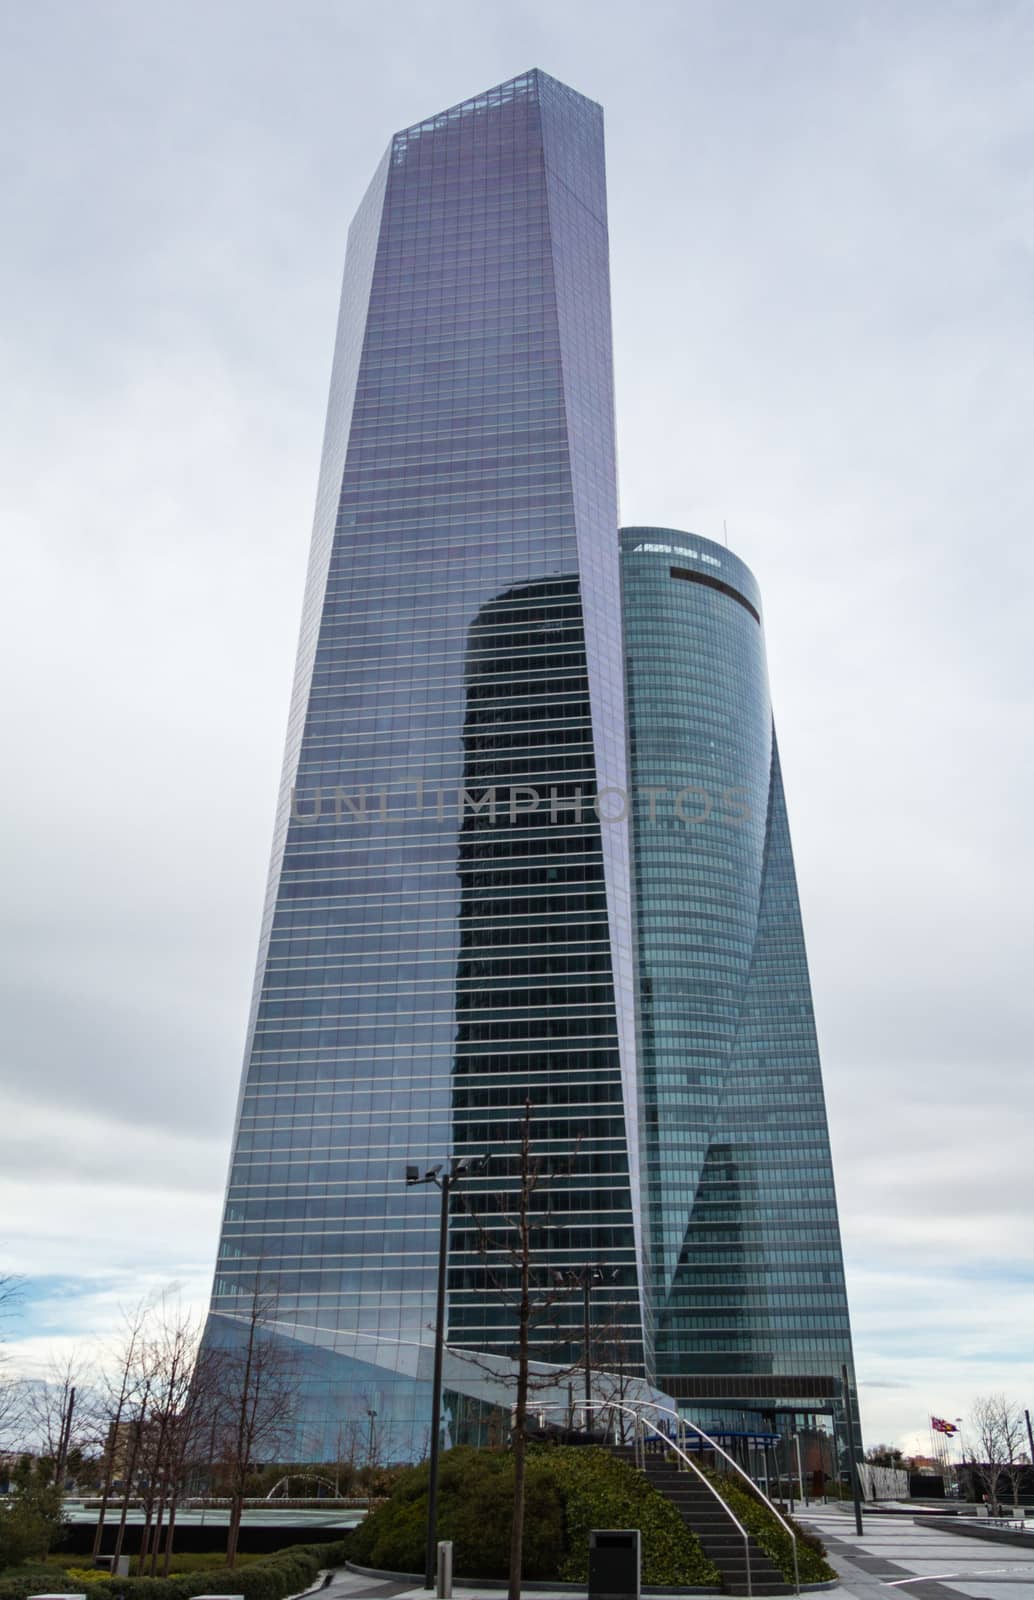 Cuatro Torres Business Area (CTBA) building skyscrapers, in Madr by doble.d